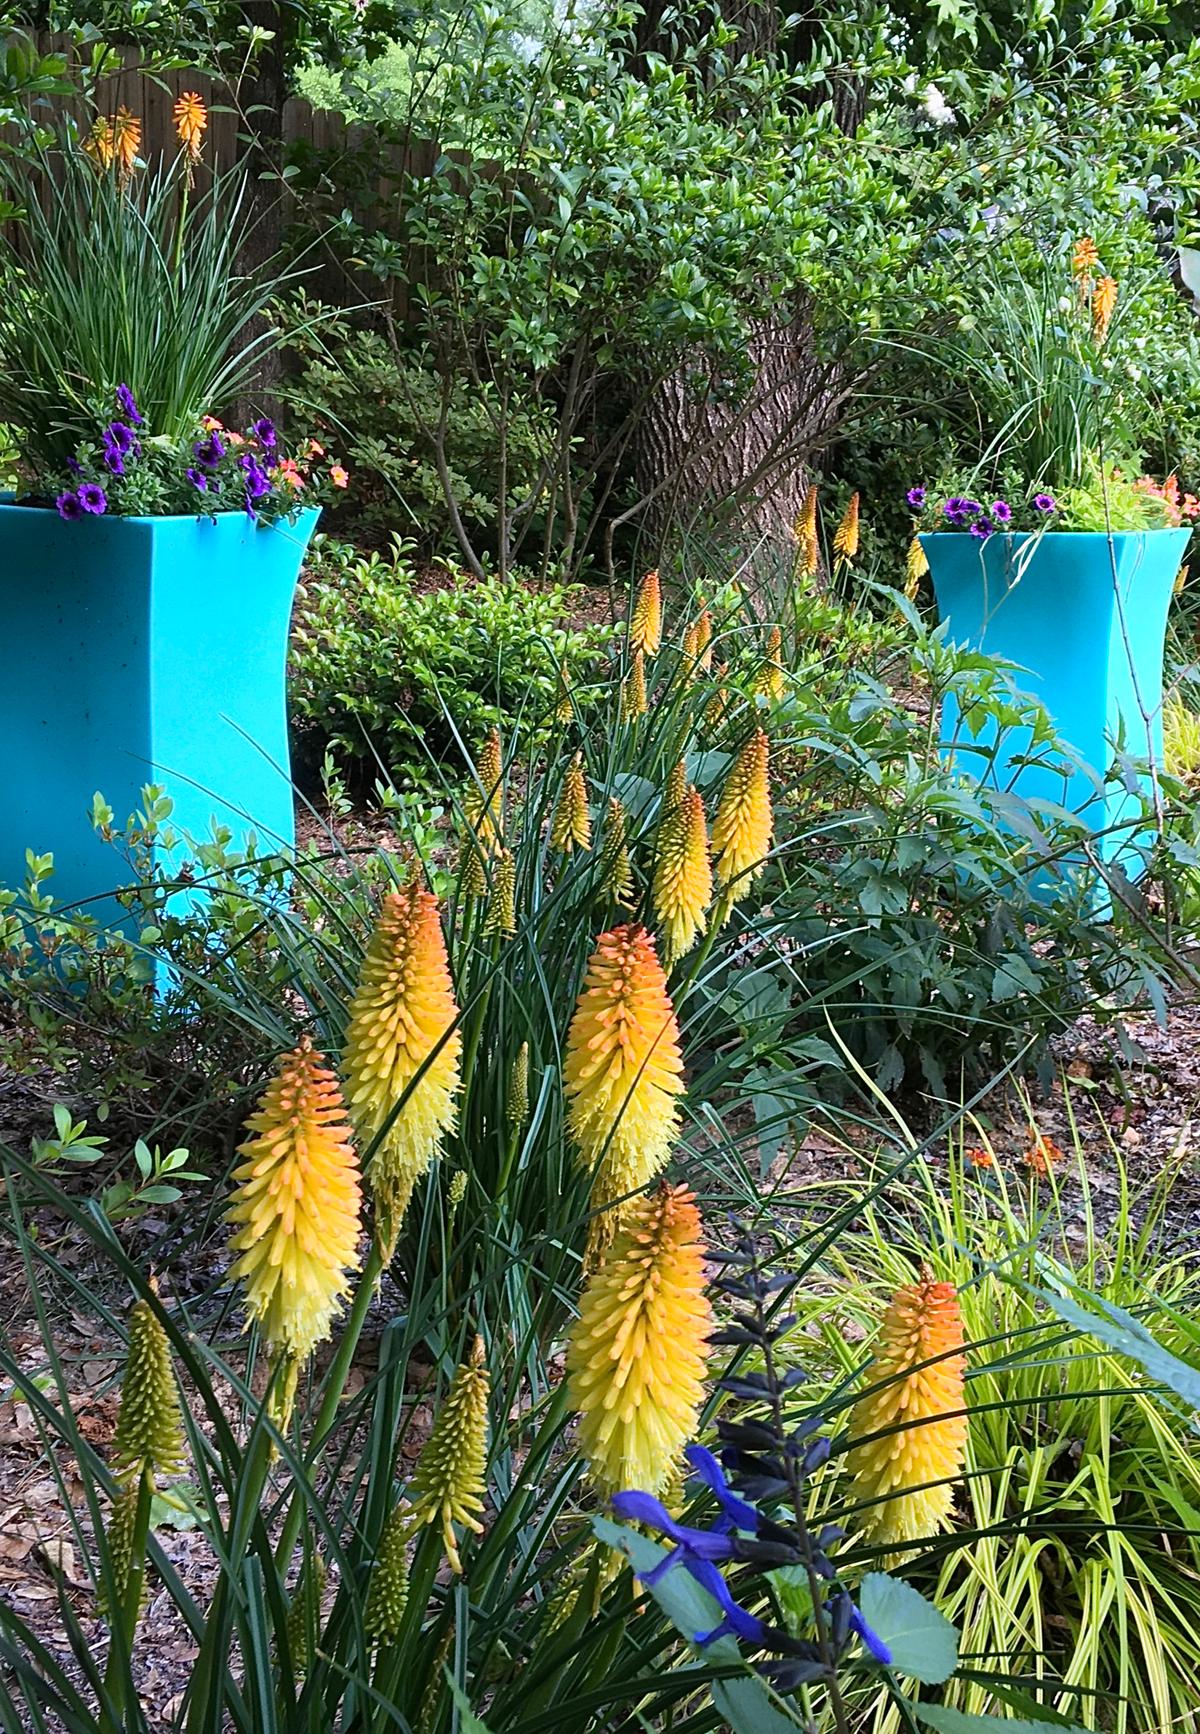 All three containers were planted with Pyromania Blaze kniphofia, Superbells Grape Punch calibrachoa, Superbells Coral Sun calibrachoa and Illusion Emerald Lace ornamental sweet potato. (Photo courtesy of Norman Winter/TNS)